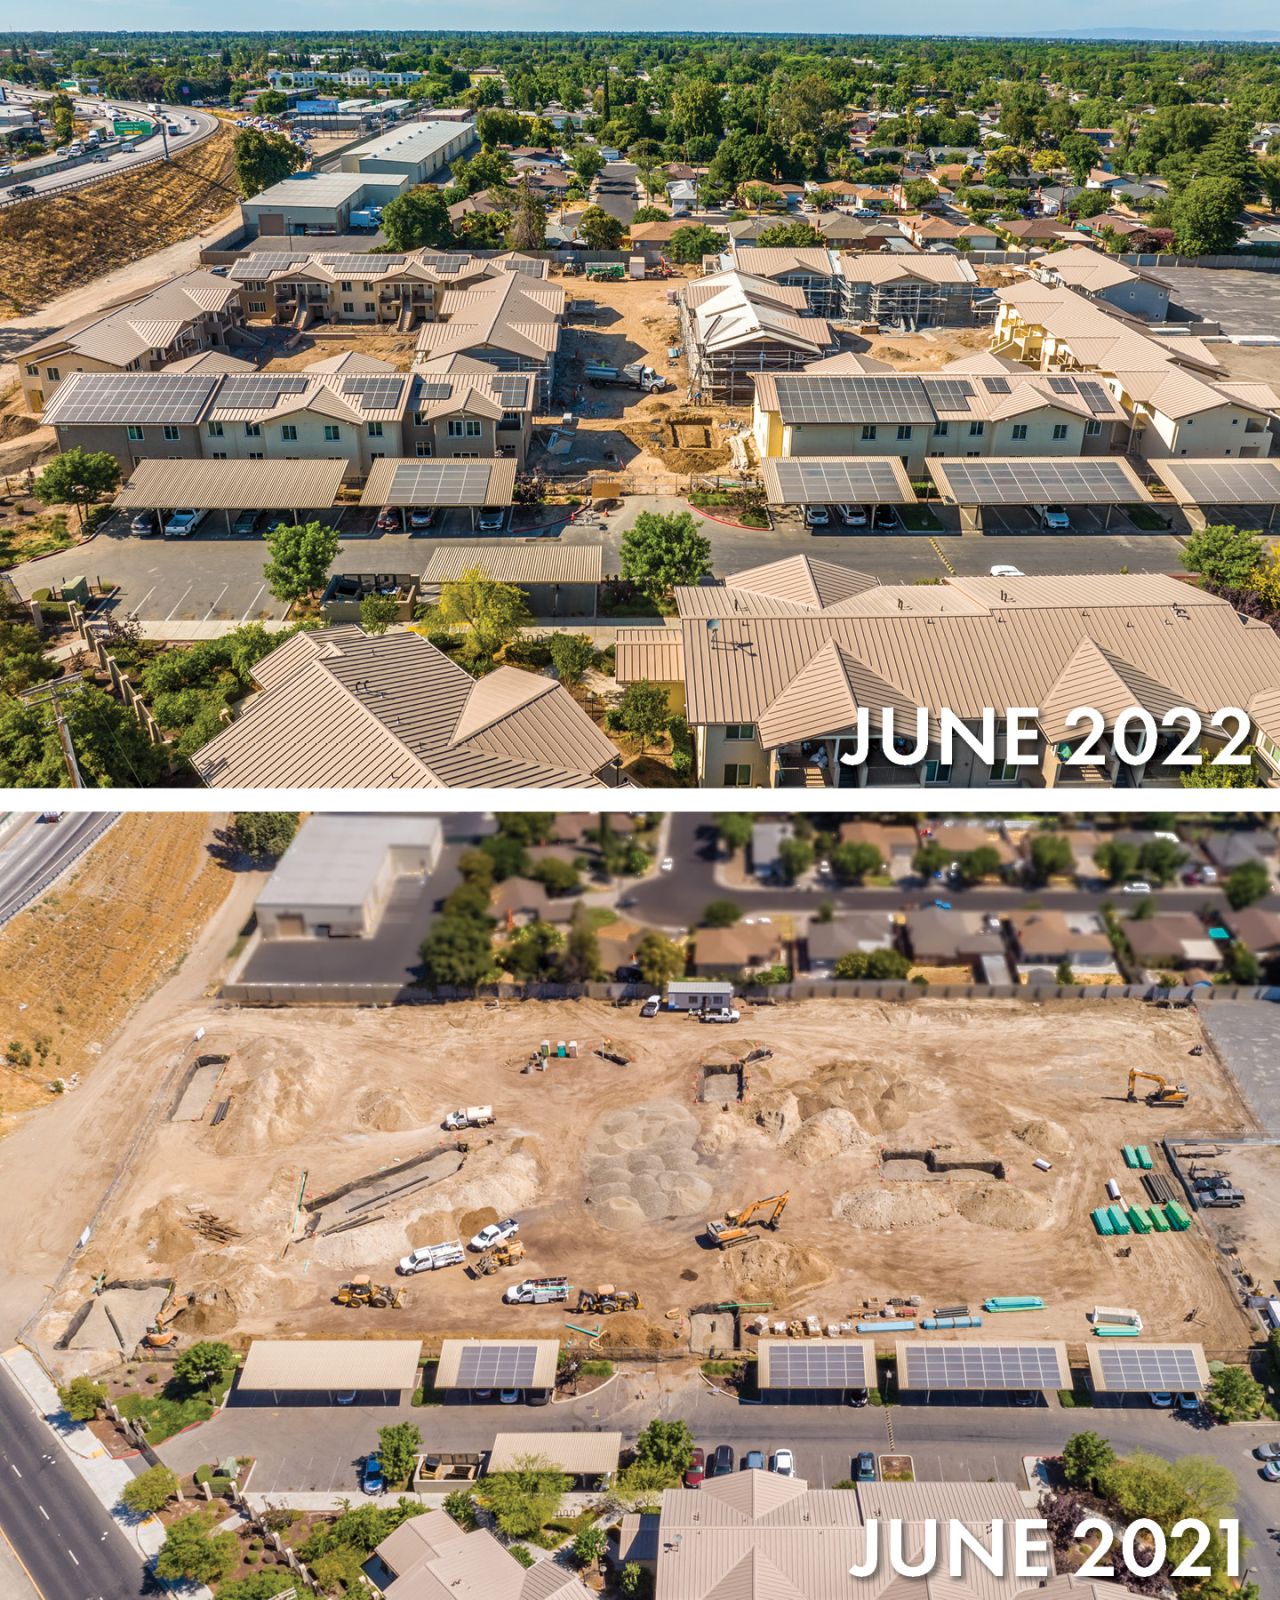 Comparison photo of the Archway Commons II Affordable Housing 1-Year of Construction Progress